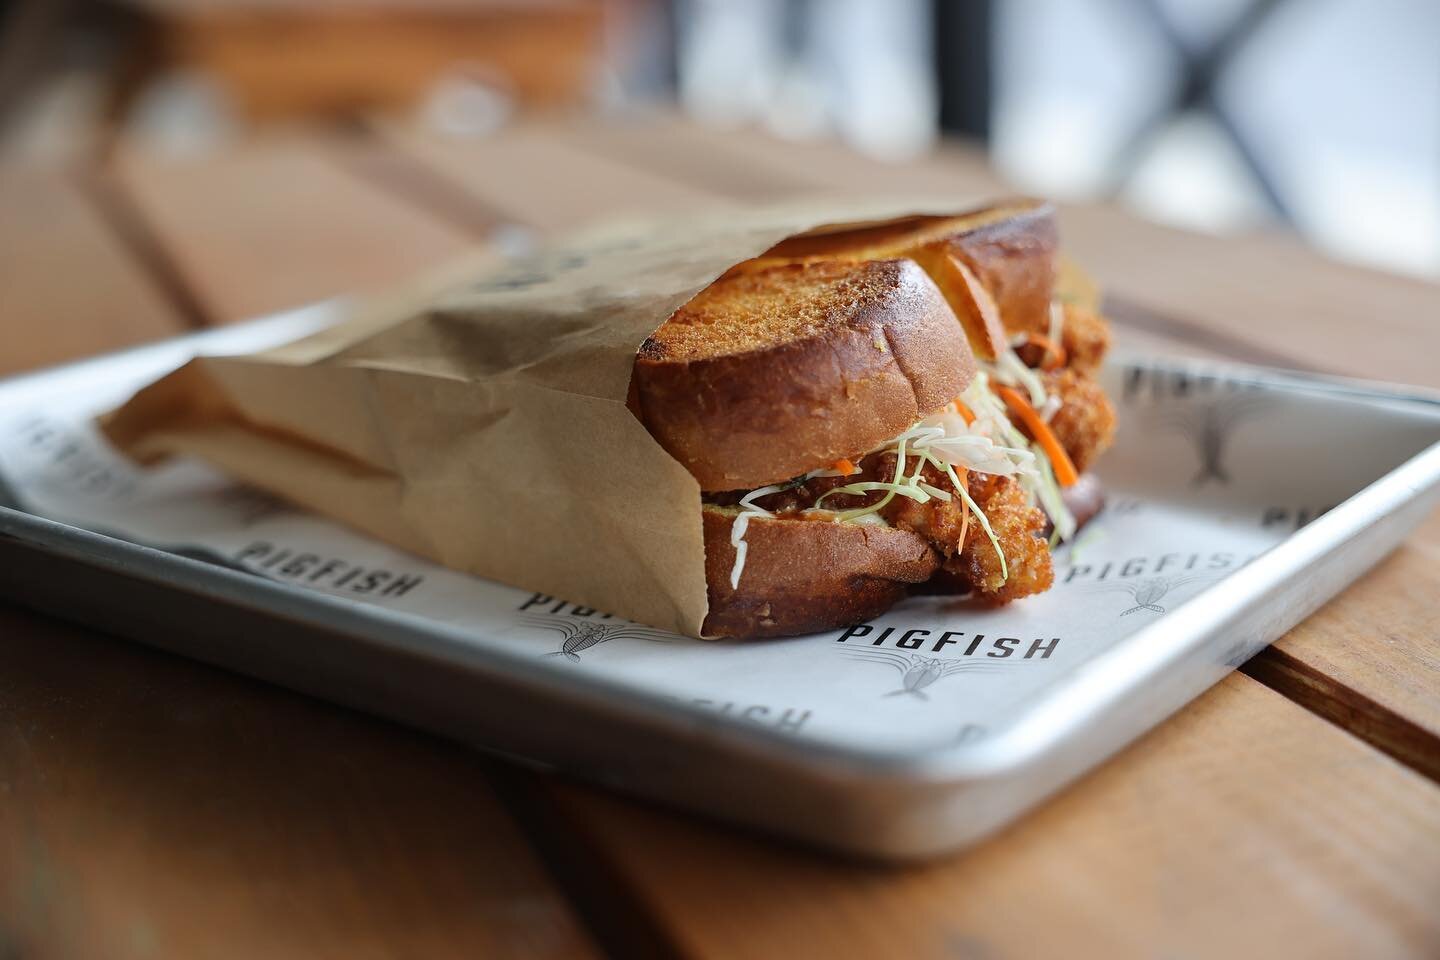 Discover a job as satisfying as our sandwiches. Join our Pigfish crew! Pigfish is gearing up for our grand opening and searching for fantastic chefs and friendly counter staff.

Come meet us in person this Thursday between 4 and 6 pm at Pigfish, or a